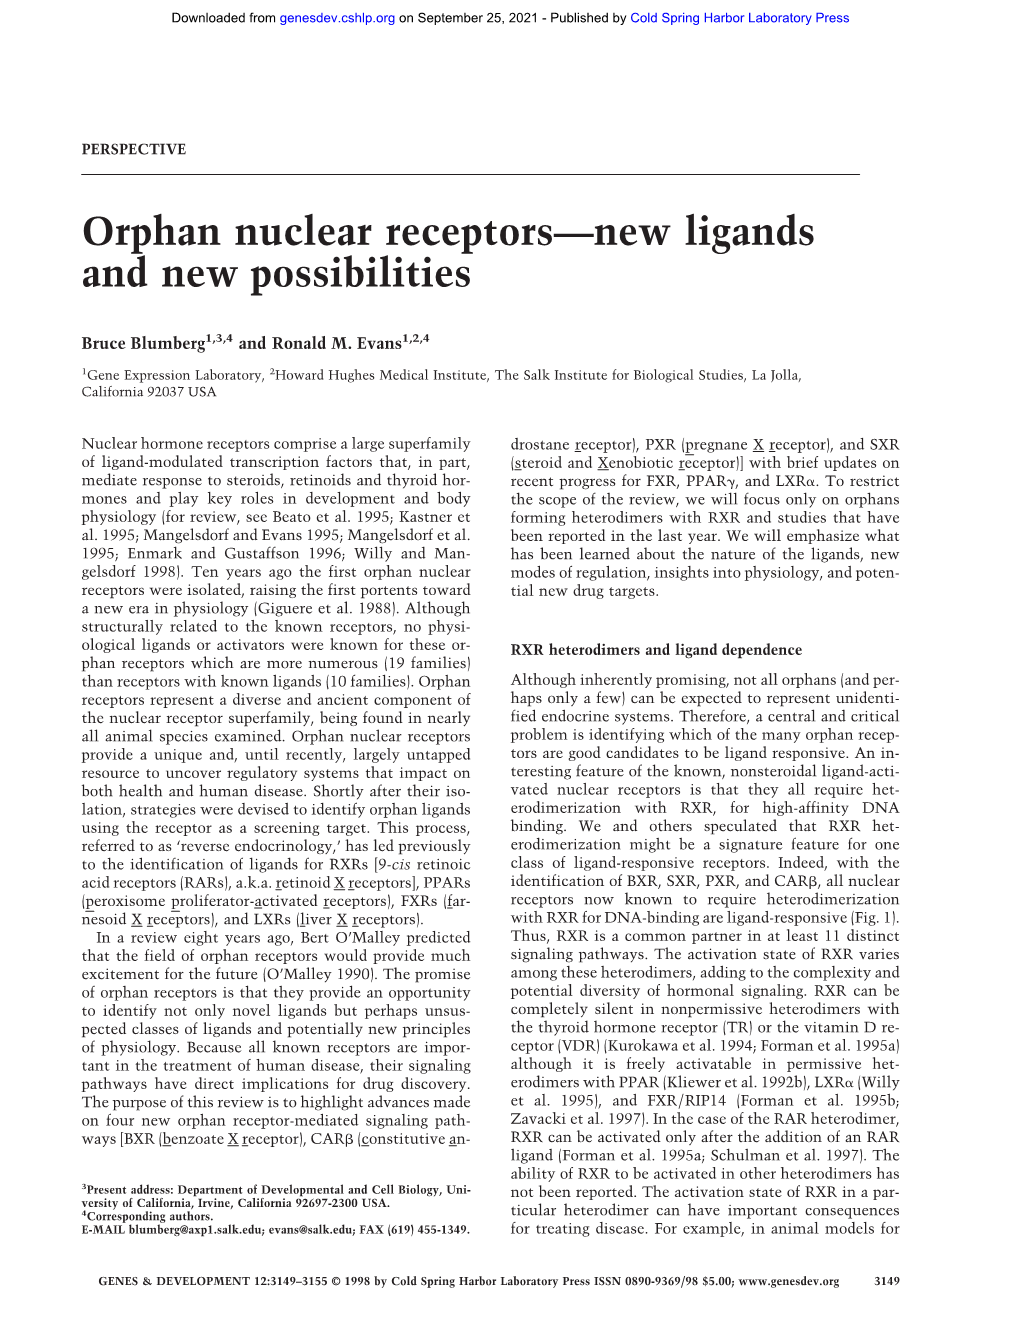 Orphan Nuclear Receptors—New Ligands and New Possibilities